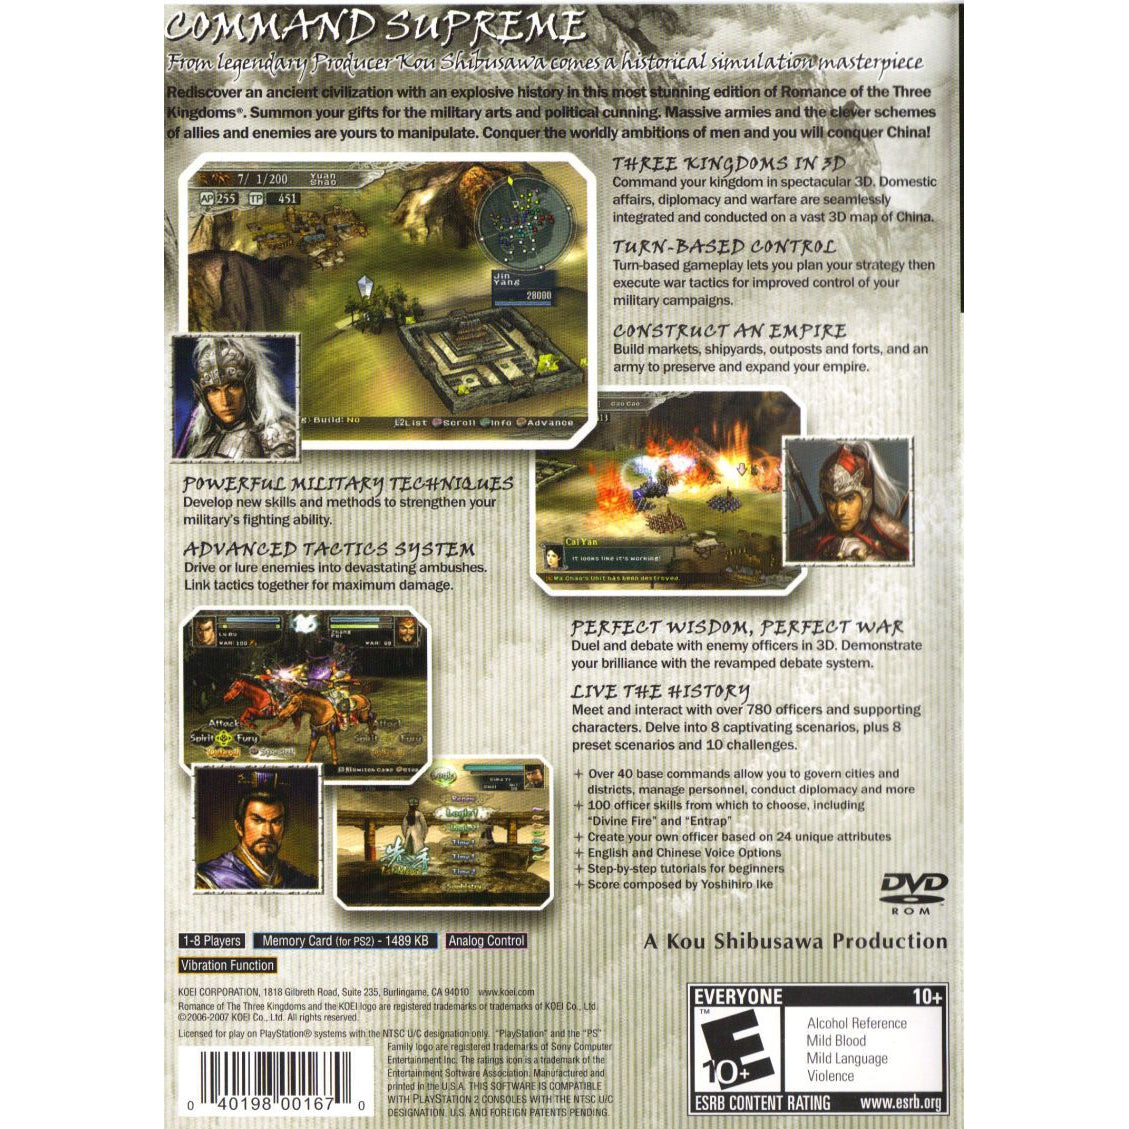 Romance of the Three Kingdoms XI - PlayStation 2 (PS2) Game Complete - YourGamingShop.com - Buy, Sell, Trade Video Games Online. 120 Day Warranty. Satisfaction Guaranteed.